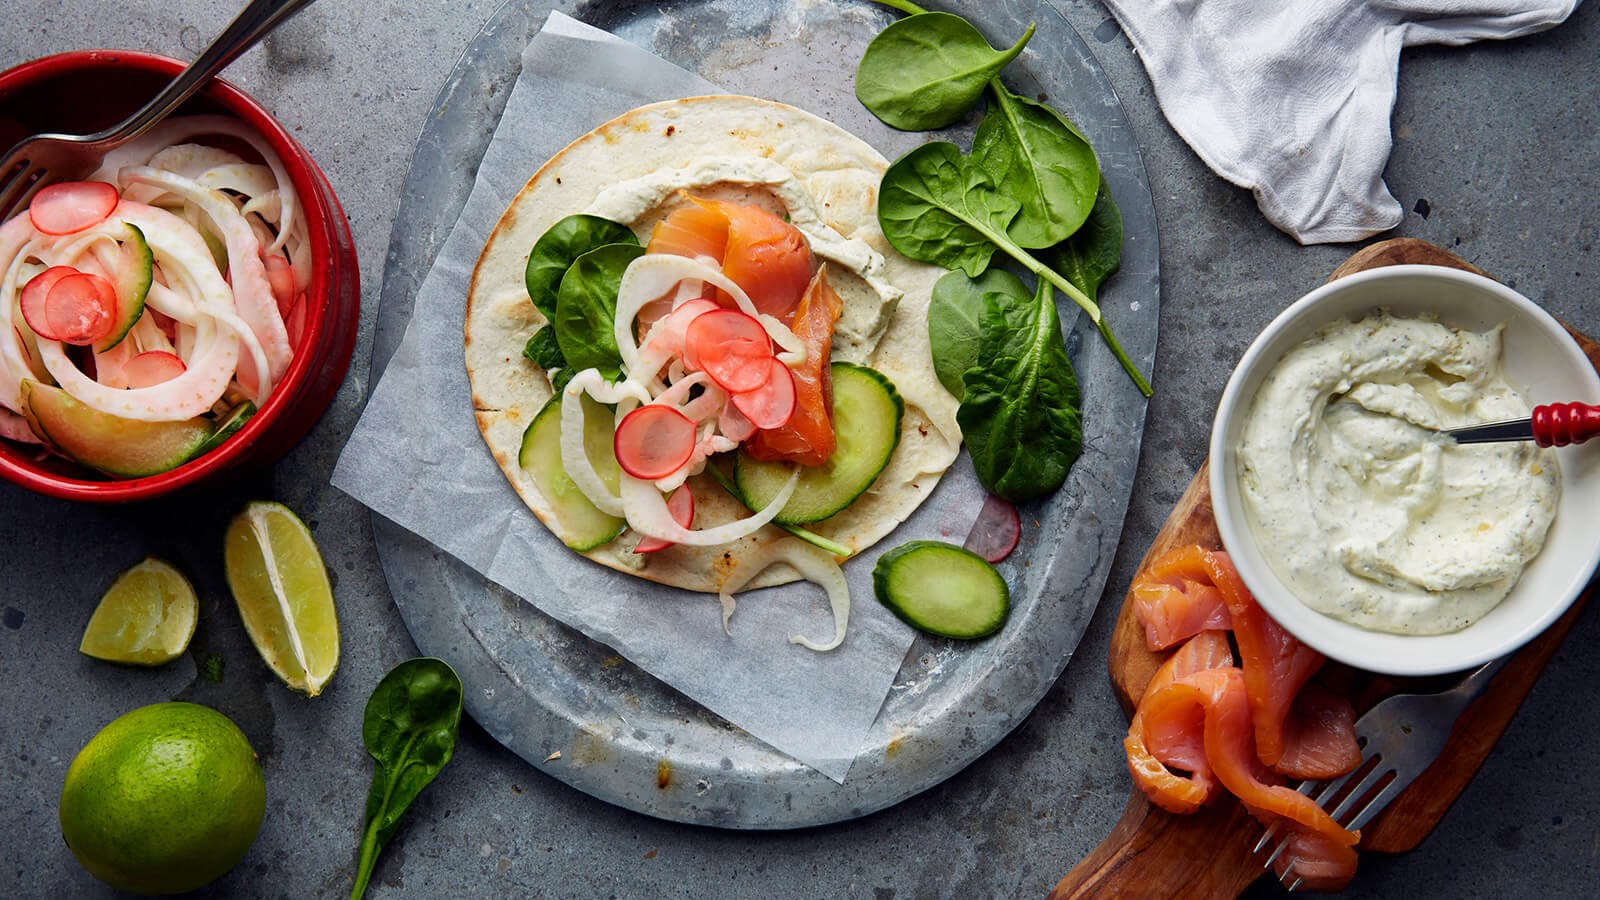 Taco with smoked salmon with pickled veggies